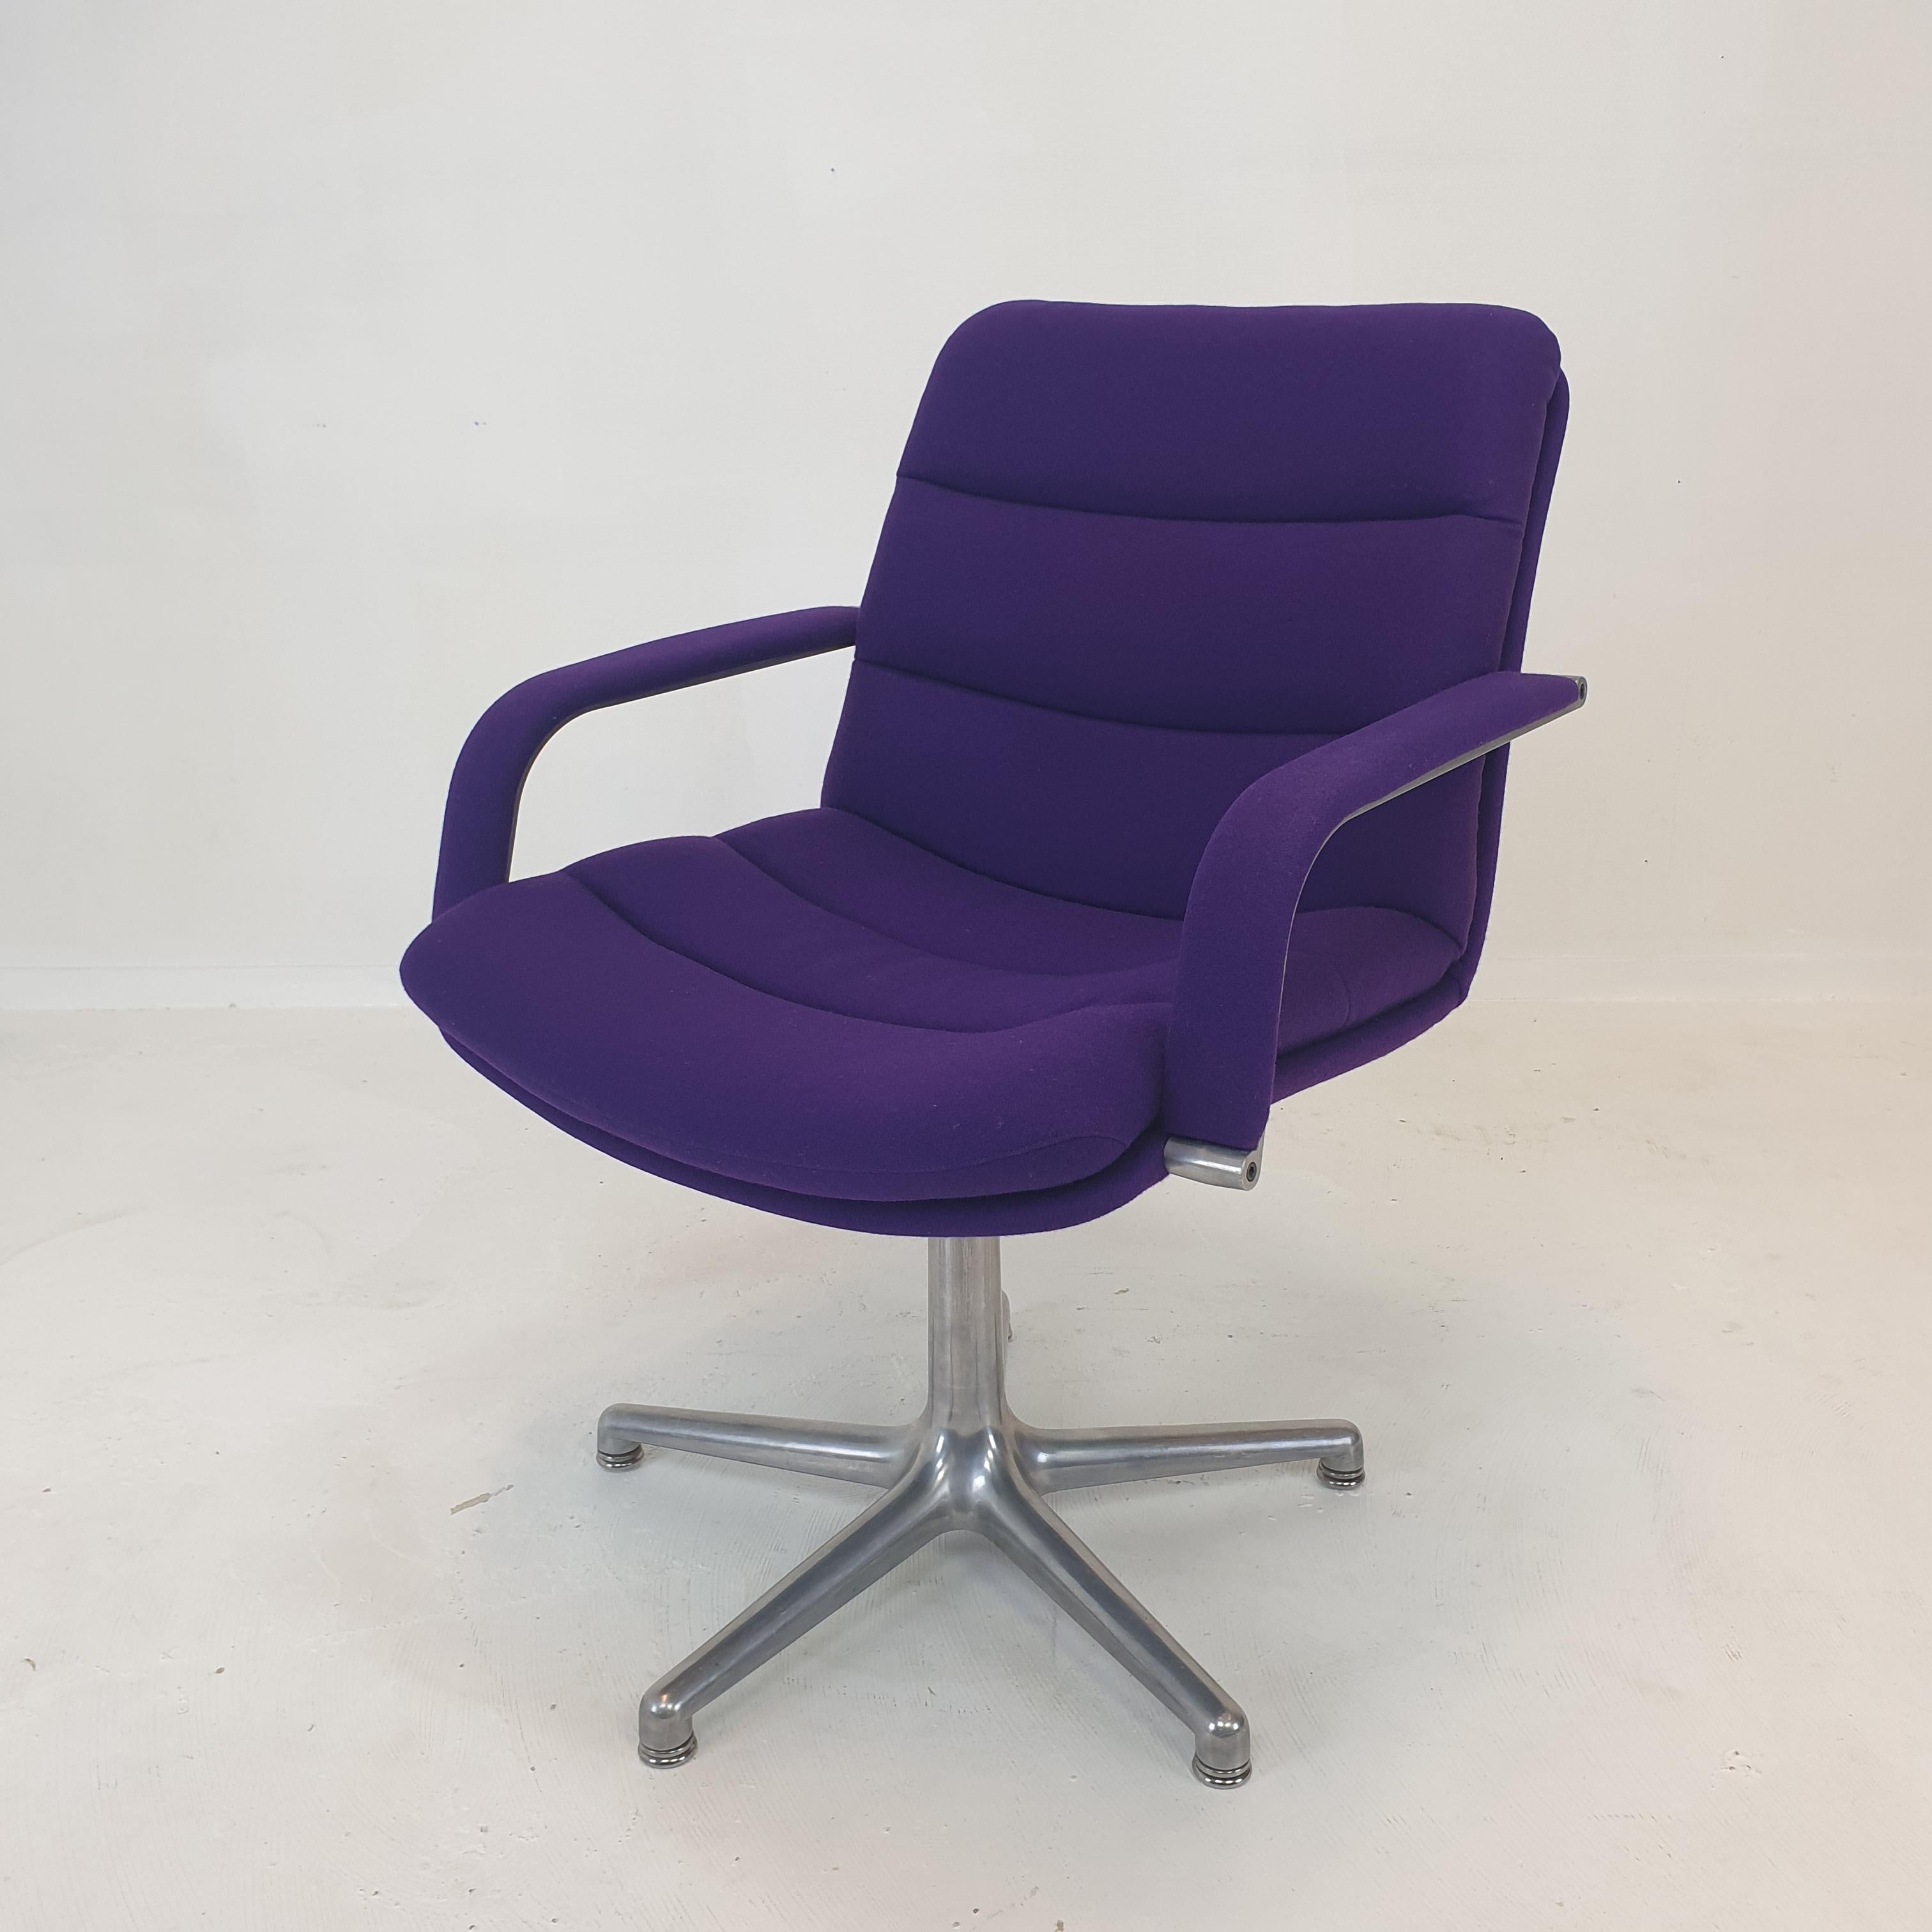 Very nice and comfortable desk or office chair designed by Geoffrey Harcourt for Artifort, The Netherlands, 1970s

These swivel chairs are made with the best materials, they have a solid aluminum five-toe base. 
The high quality wool upholstery